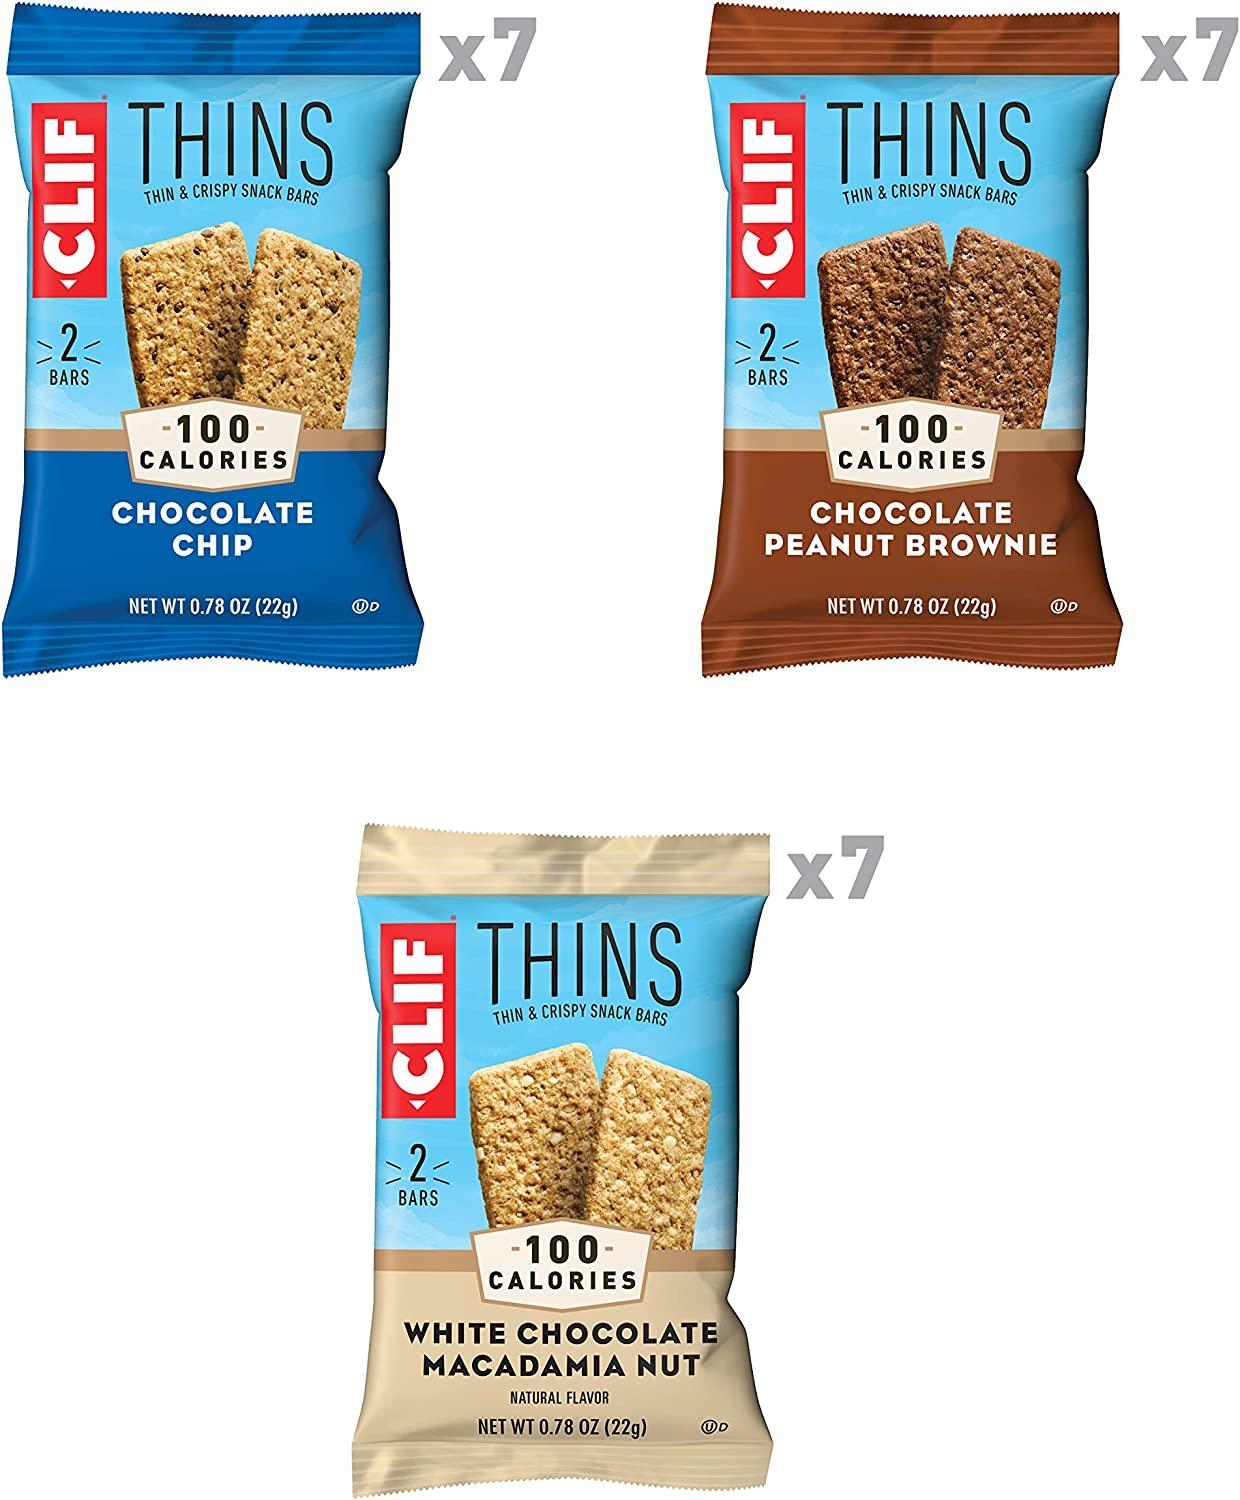 CLIF Launches CLIF® Thins Snack Bars Nationwide, Expanding Product Mix For  Consumers On The Go